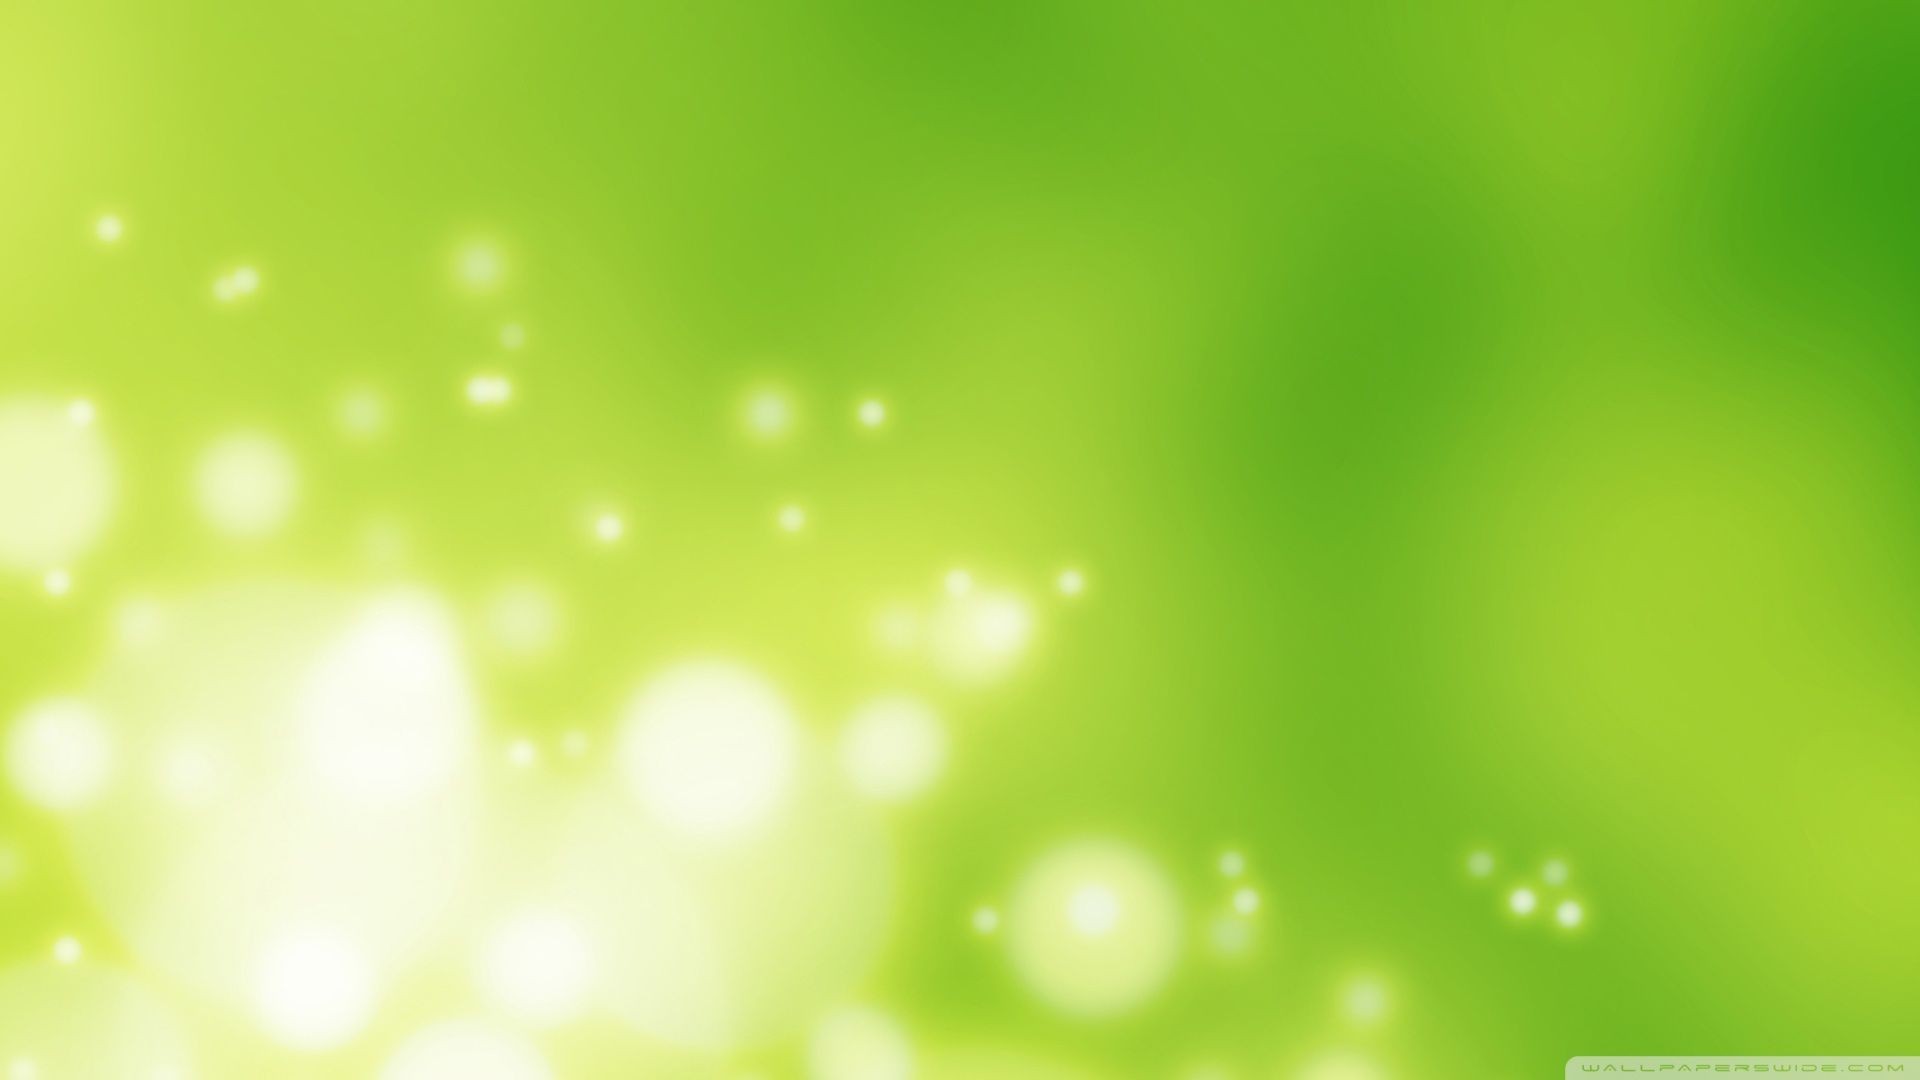 1920x1080  Wallpapers For > Lime Green Background Wallpaper